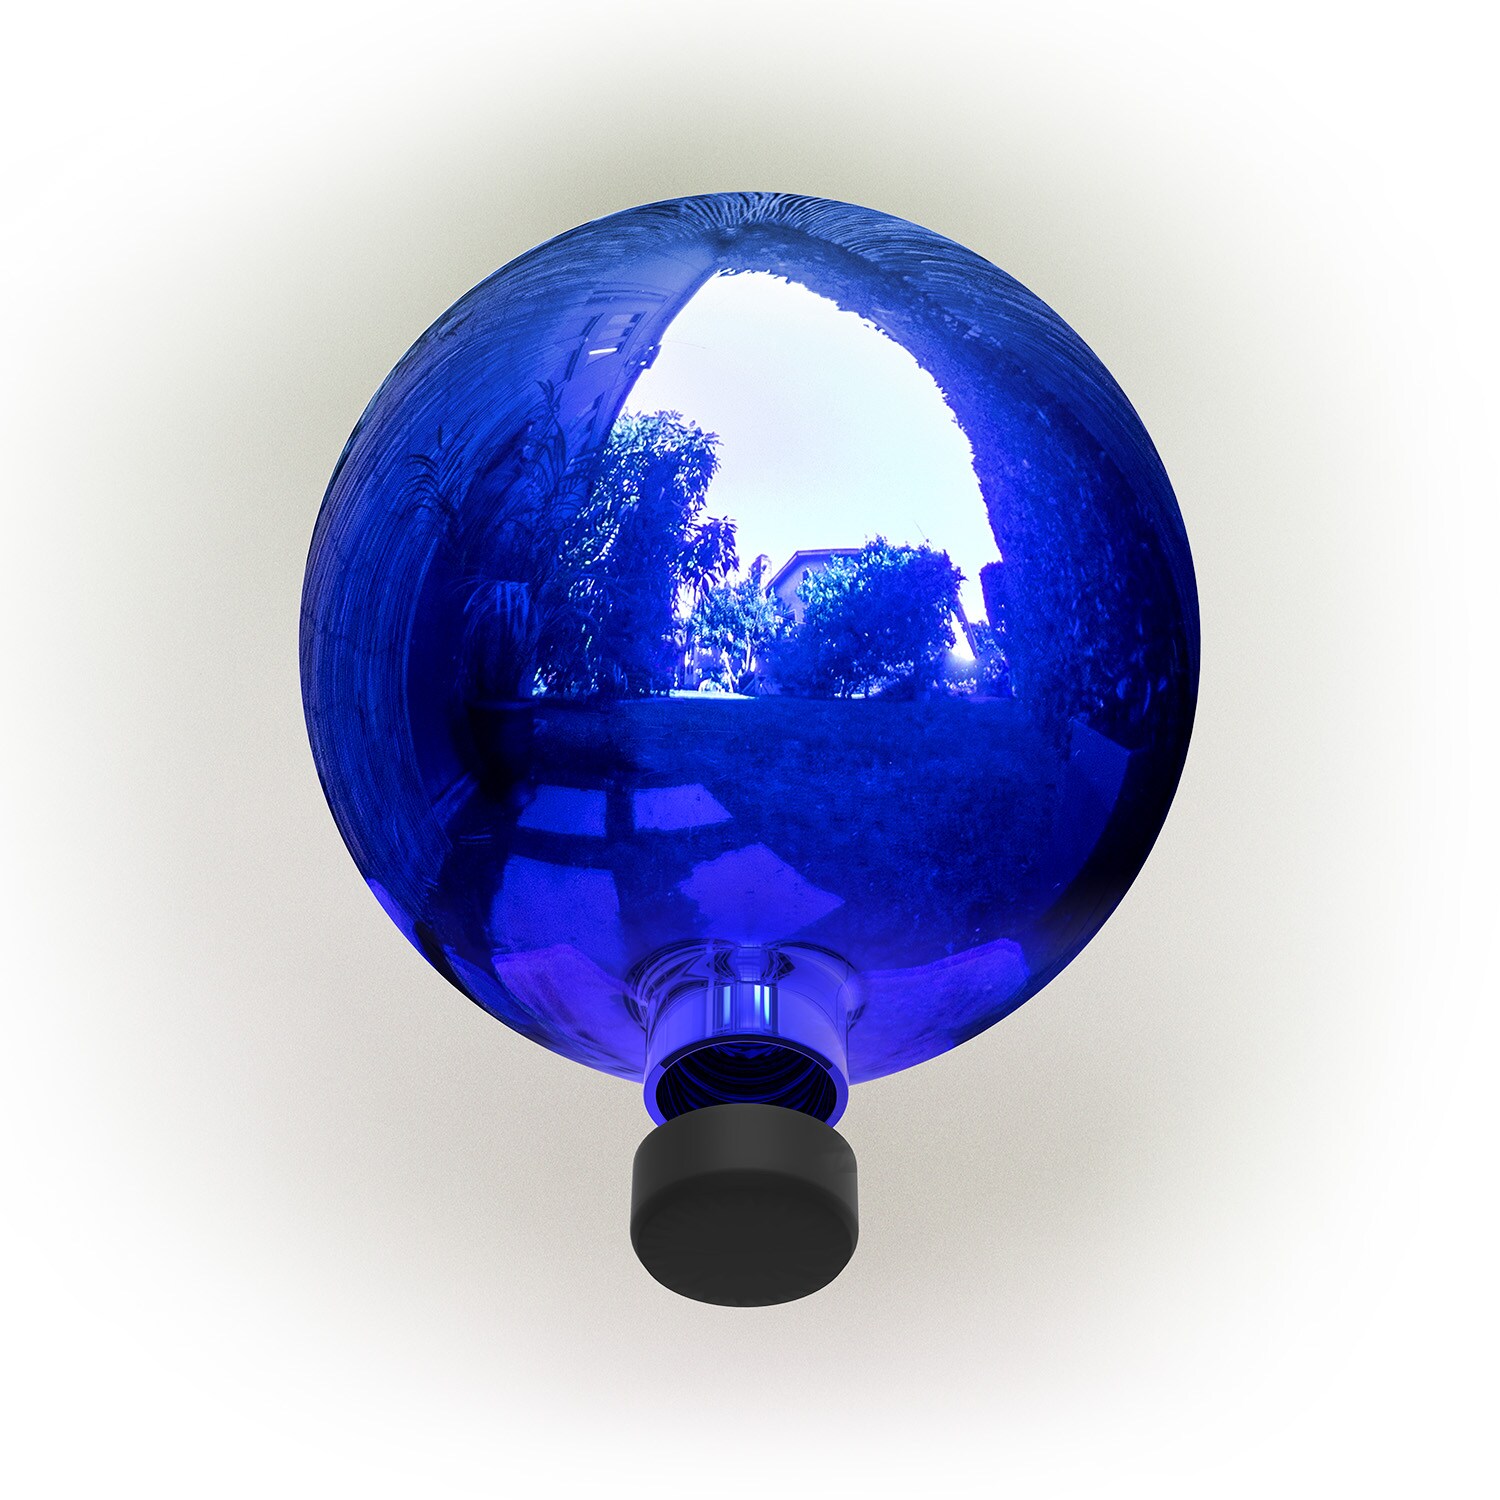 JforSJizT 6 inch Diameter Blue Gazing Ball,Blue Stainless Steel Polished Reflective Smooth Garden Sphere Globe Mirror,Colorful and Shiny Addition to Any Garden or Home 